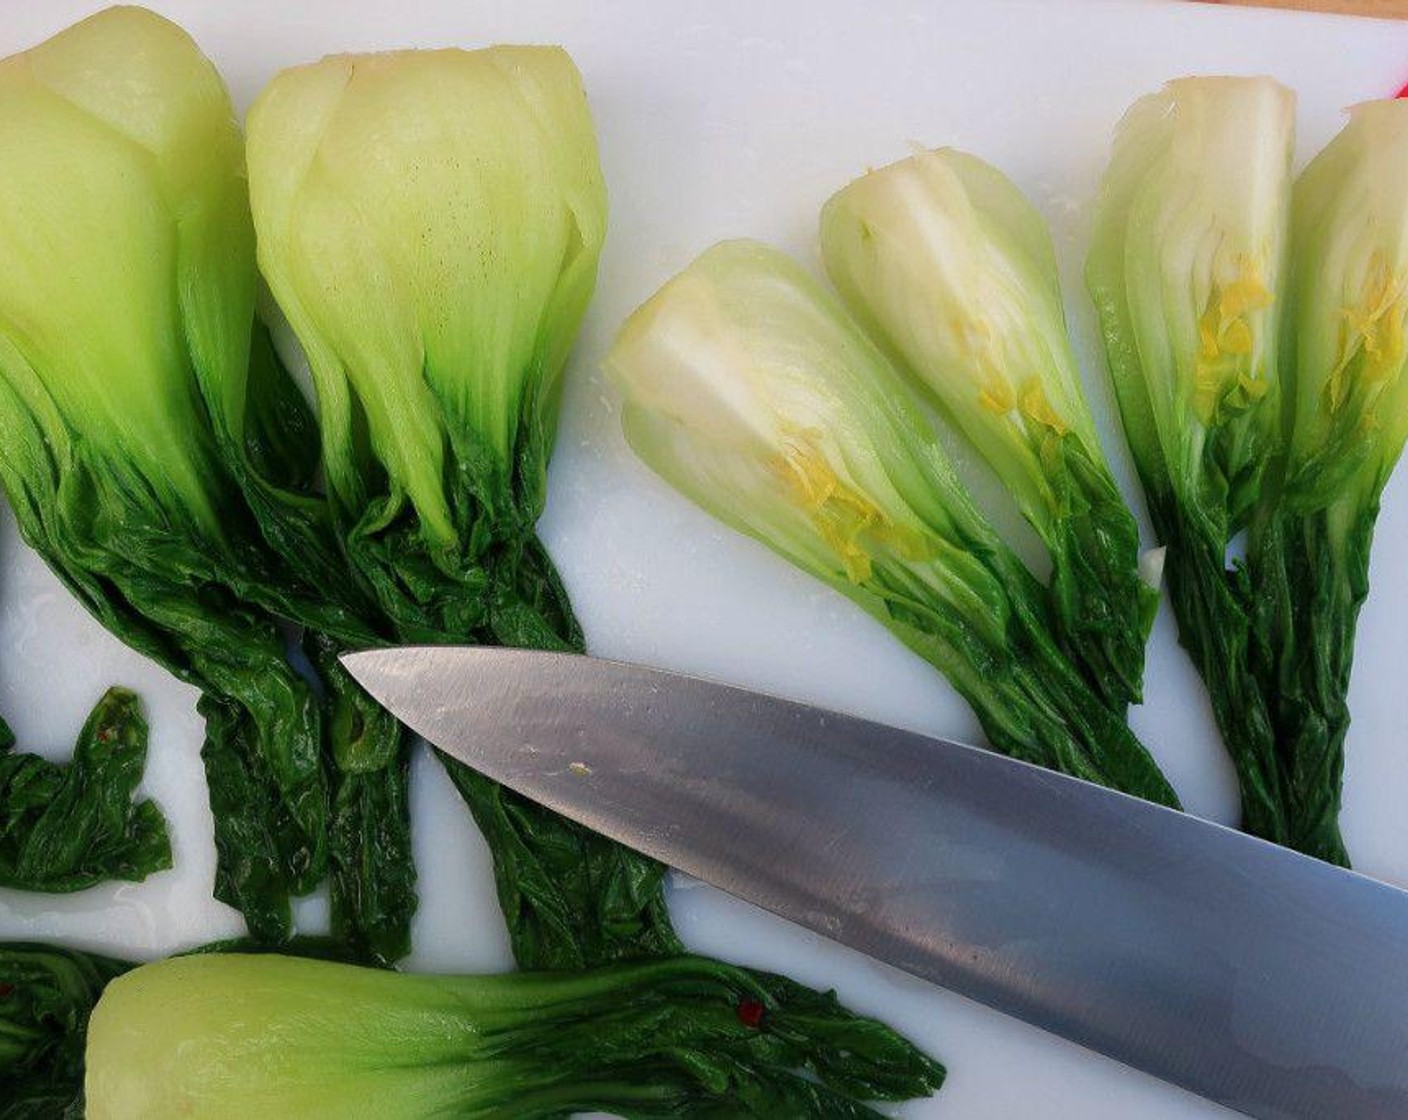 step 3 Once cooled off, drain and cut Blanched Bok Choy into quarters.